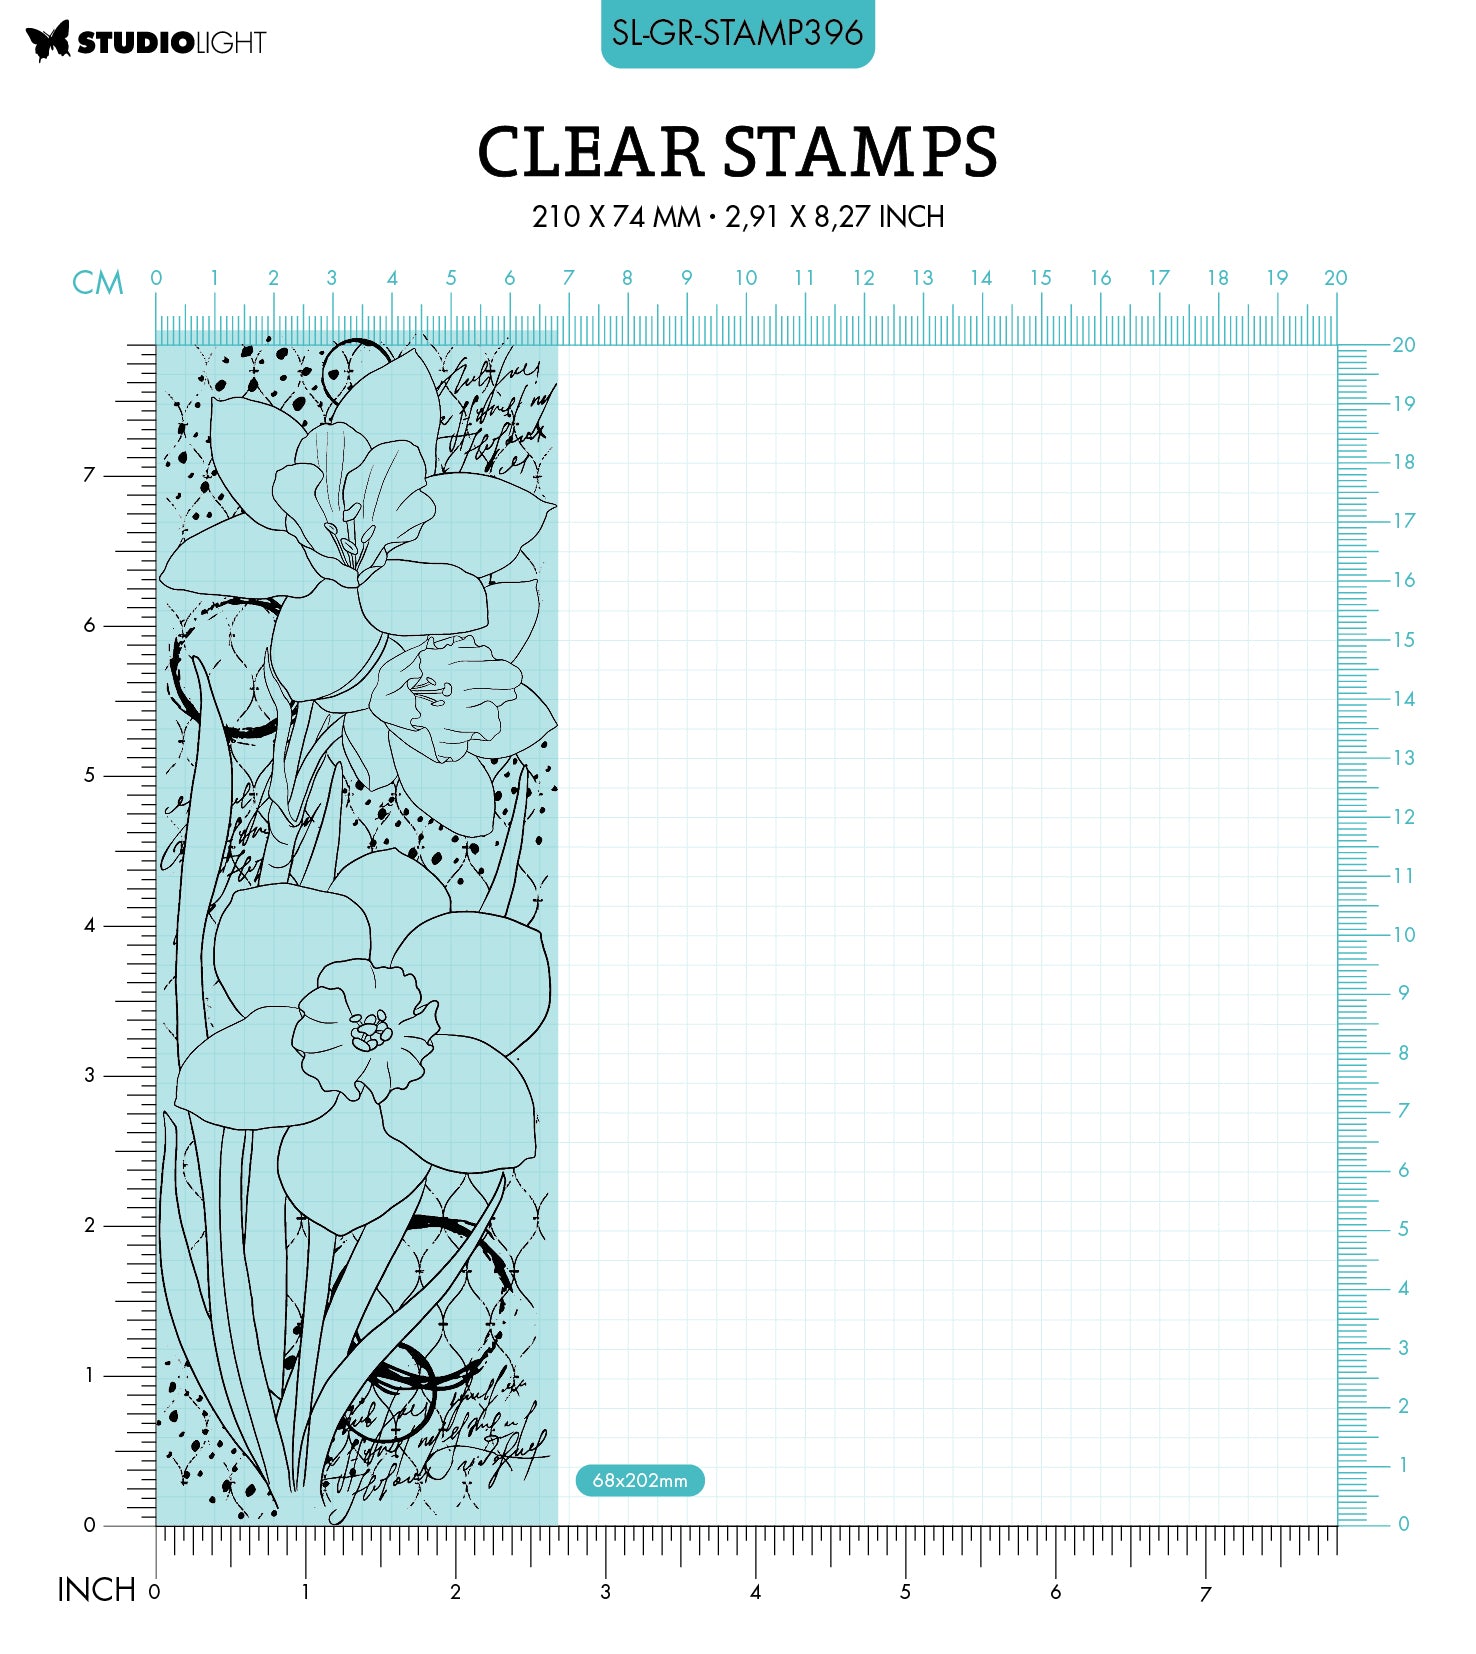 SL Clear Stamp Daffodil Flowers Grunge Collection 68x202x3mm 1 PC nr.396